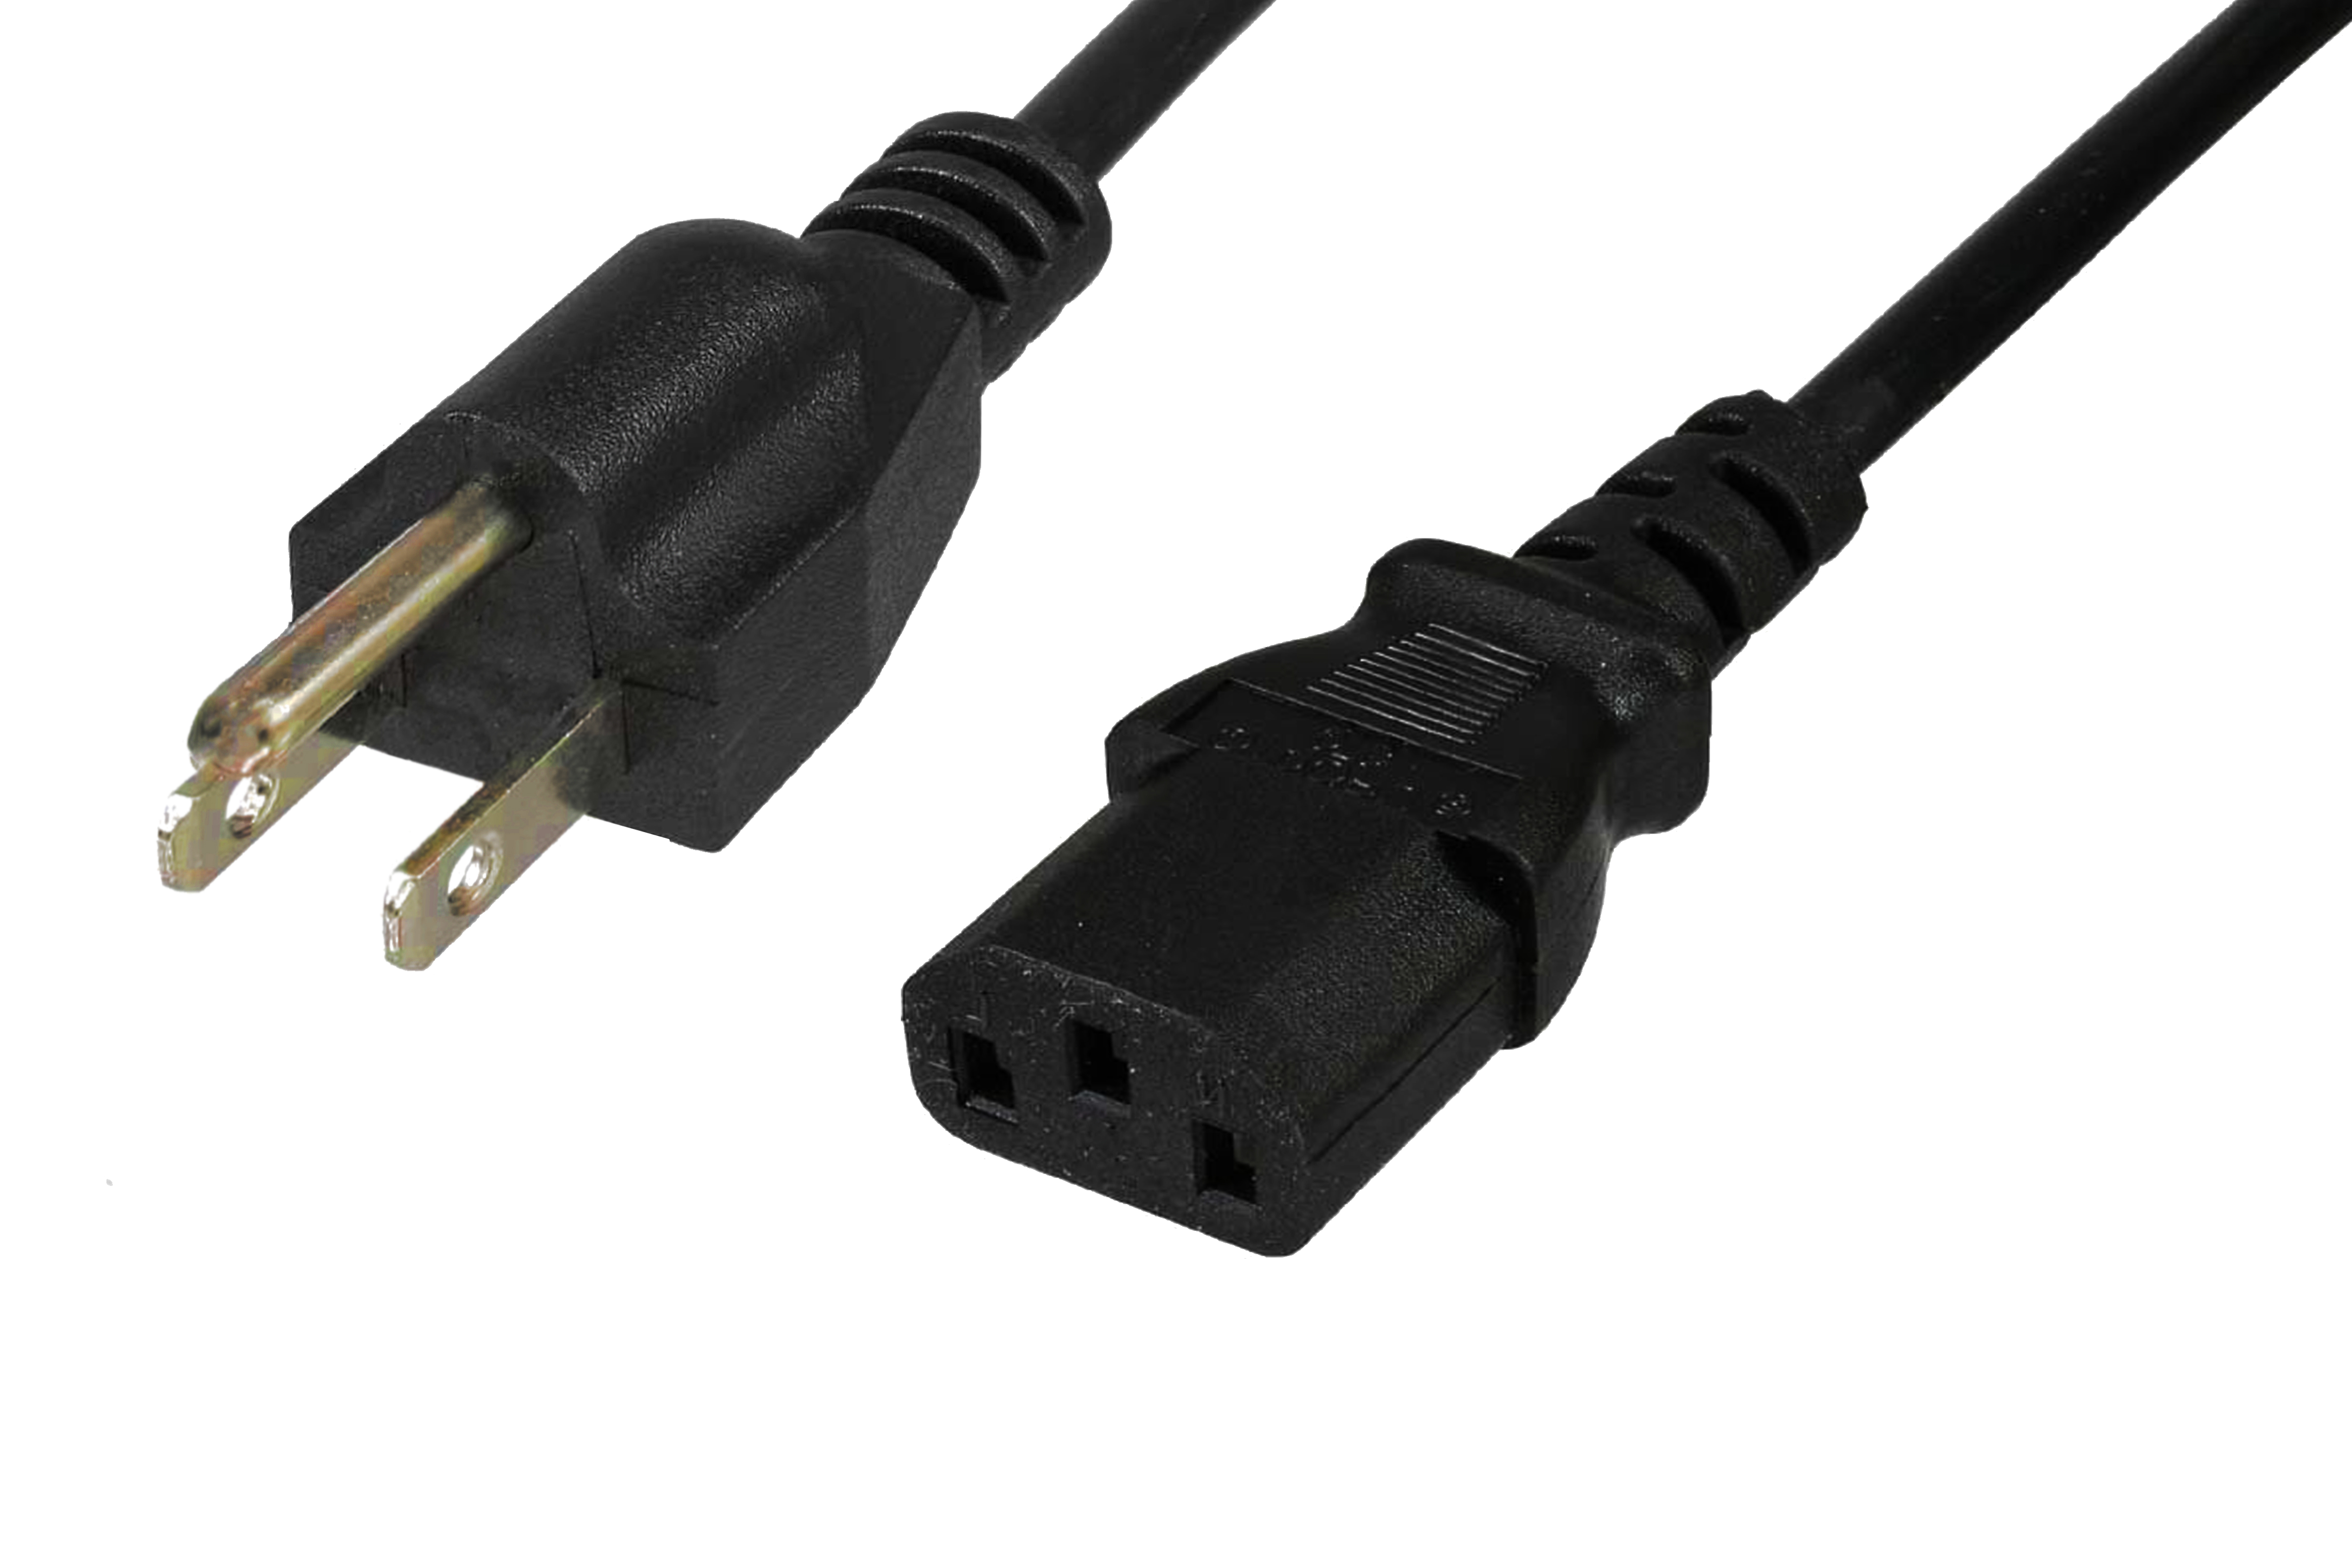 «PeakTech® NK / US-ST» device connection cable according to US standard, type Feller 498 G / C13, 125 V AC / 10A